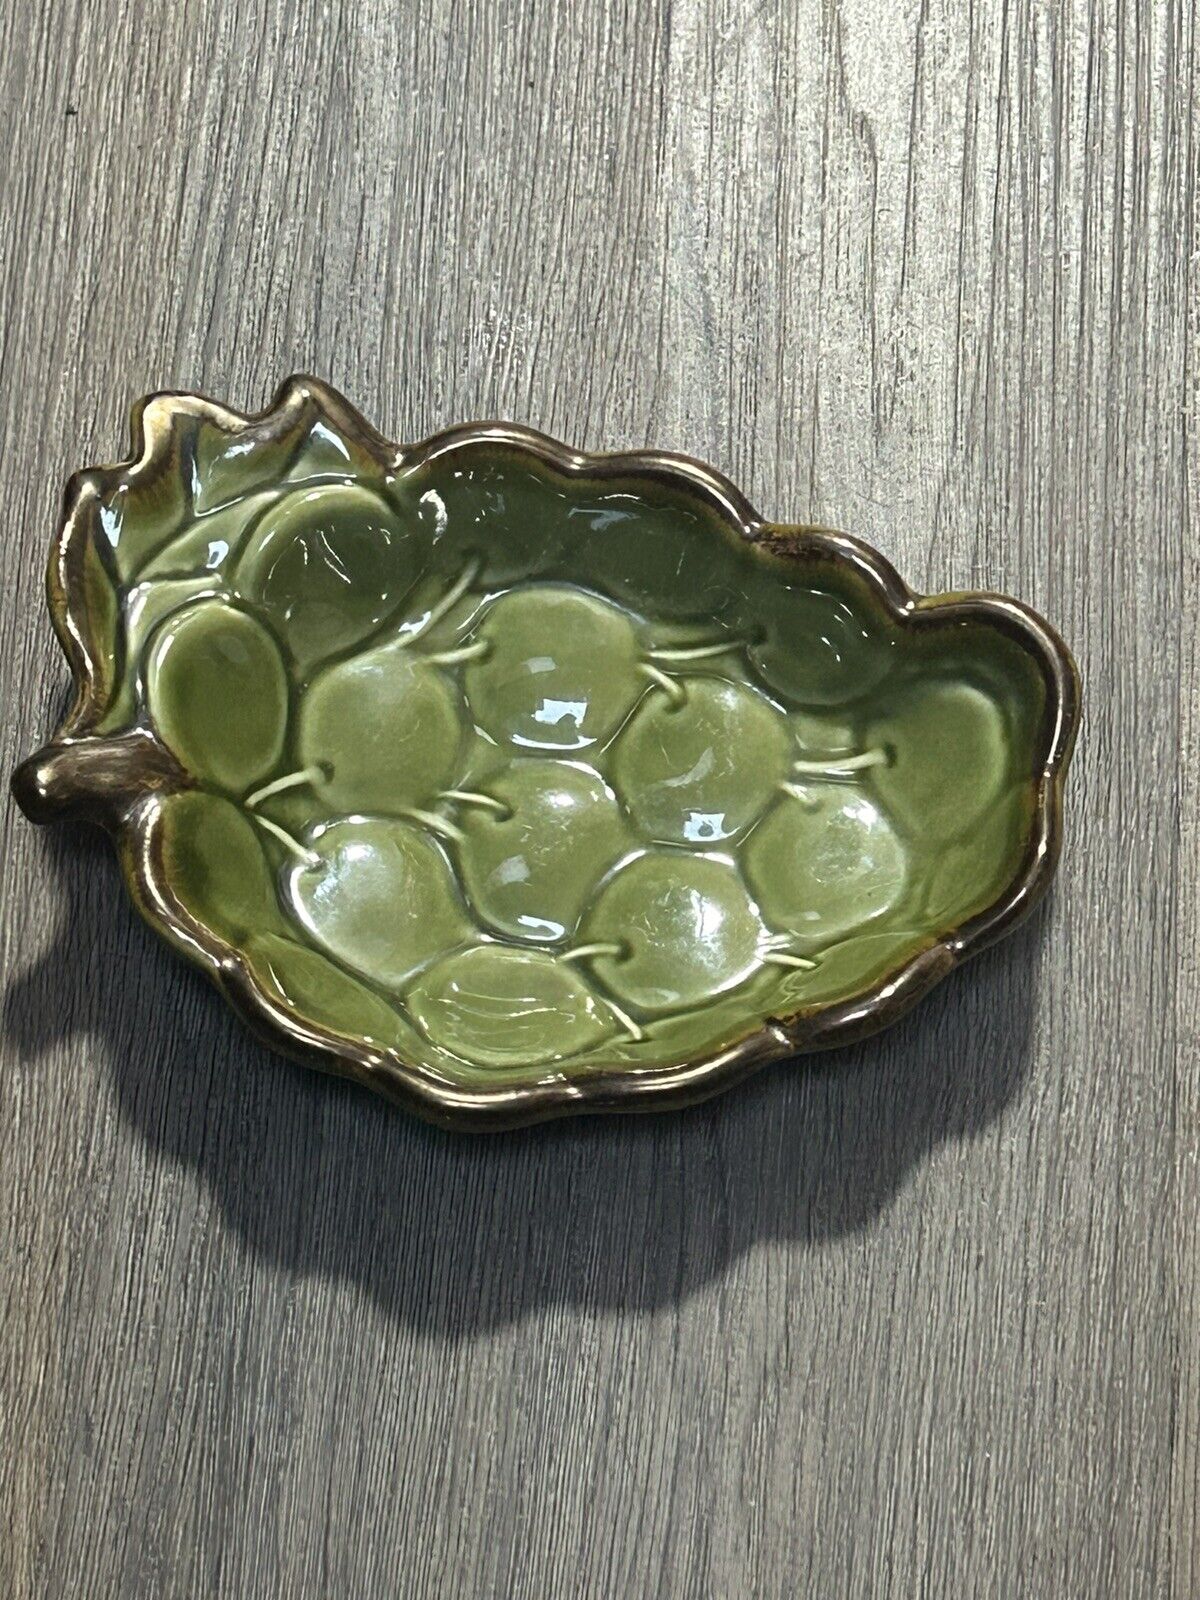 Vintage  Ashtray Candy Bowl shaped as a Grape Vine  by Susie Coelho Green